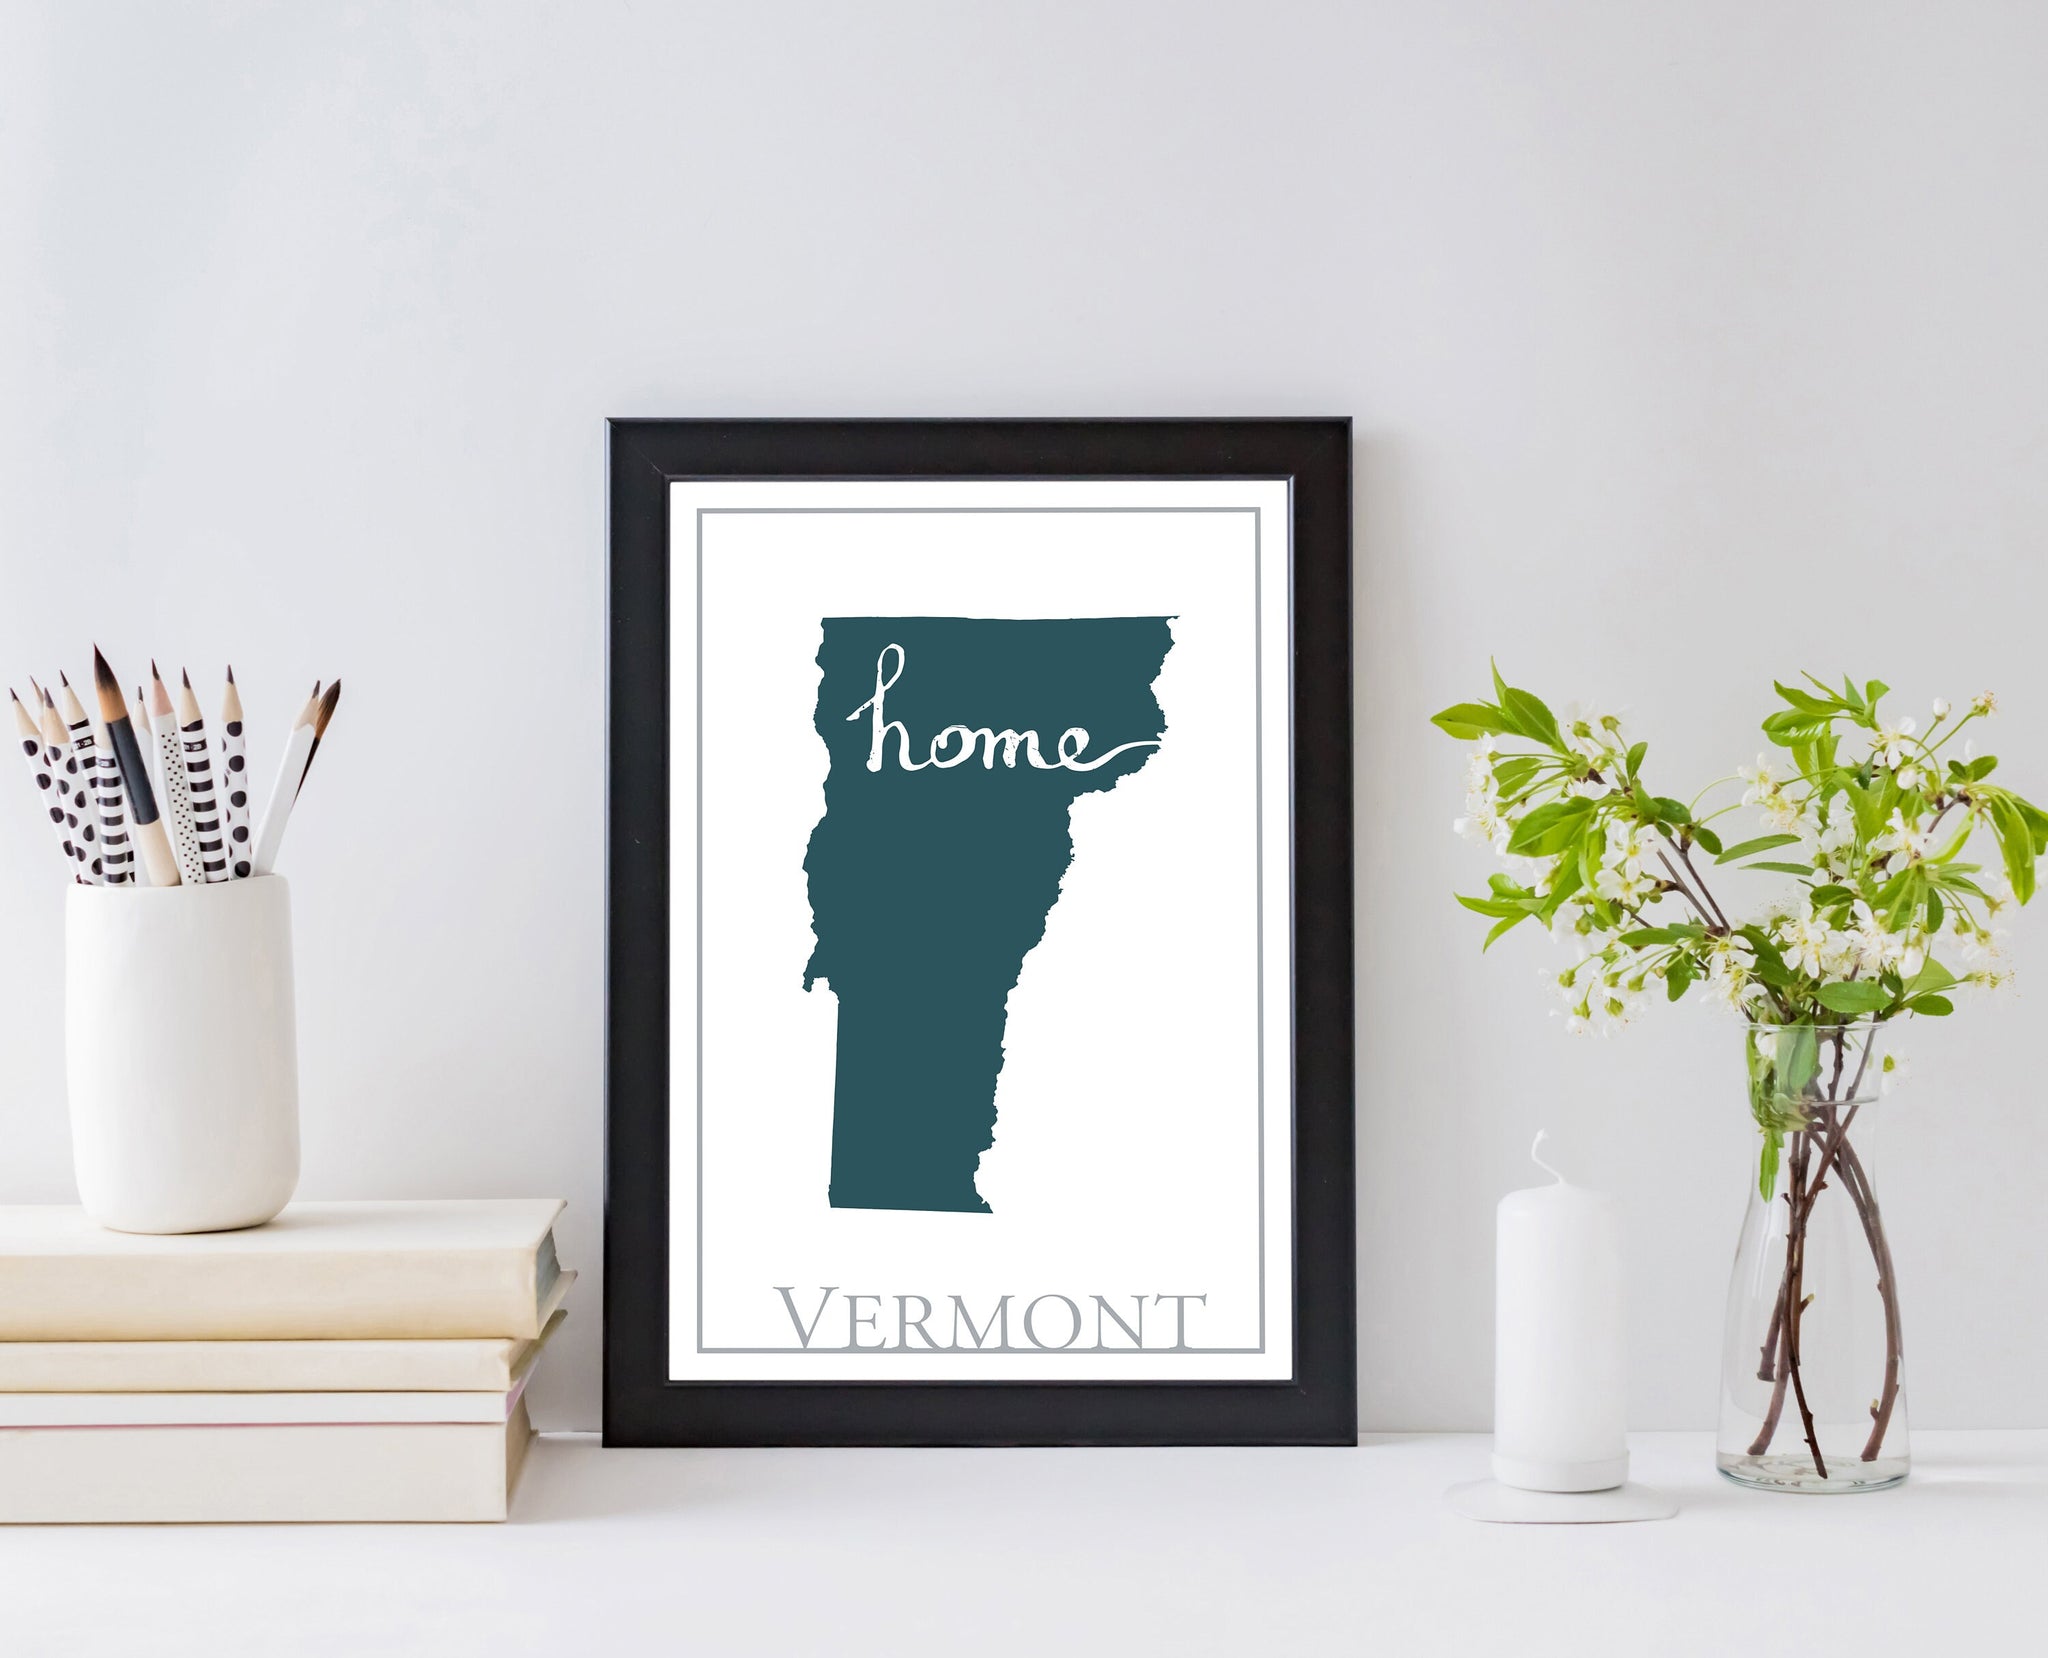 Vermont Map Wall Art, Vermont Modern Map Print, City map wall decor, Vermont City Poster Print, Vermont State Poster, Home wall decor, Gifts